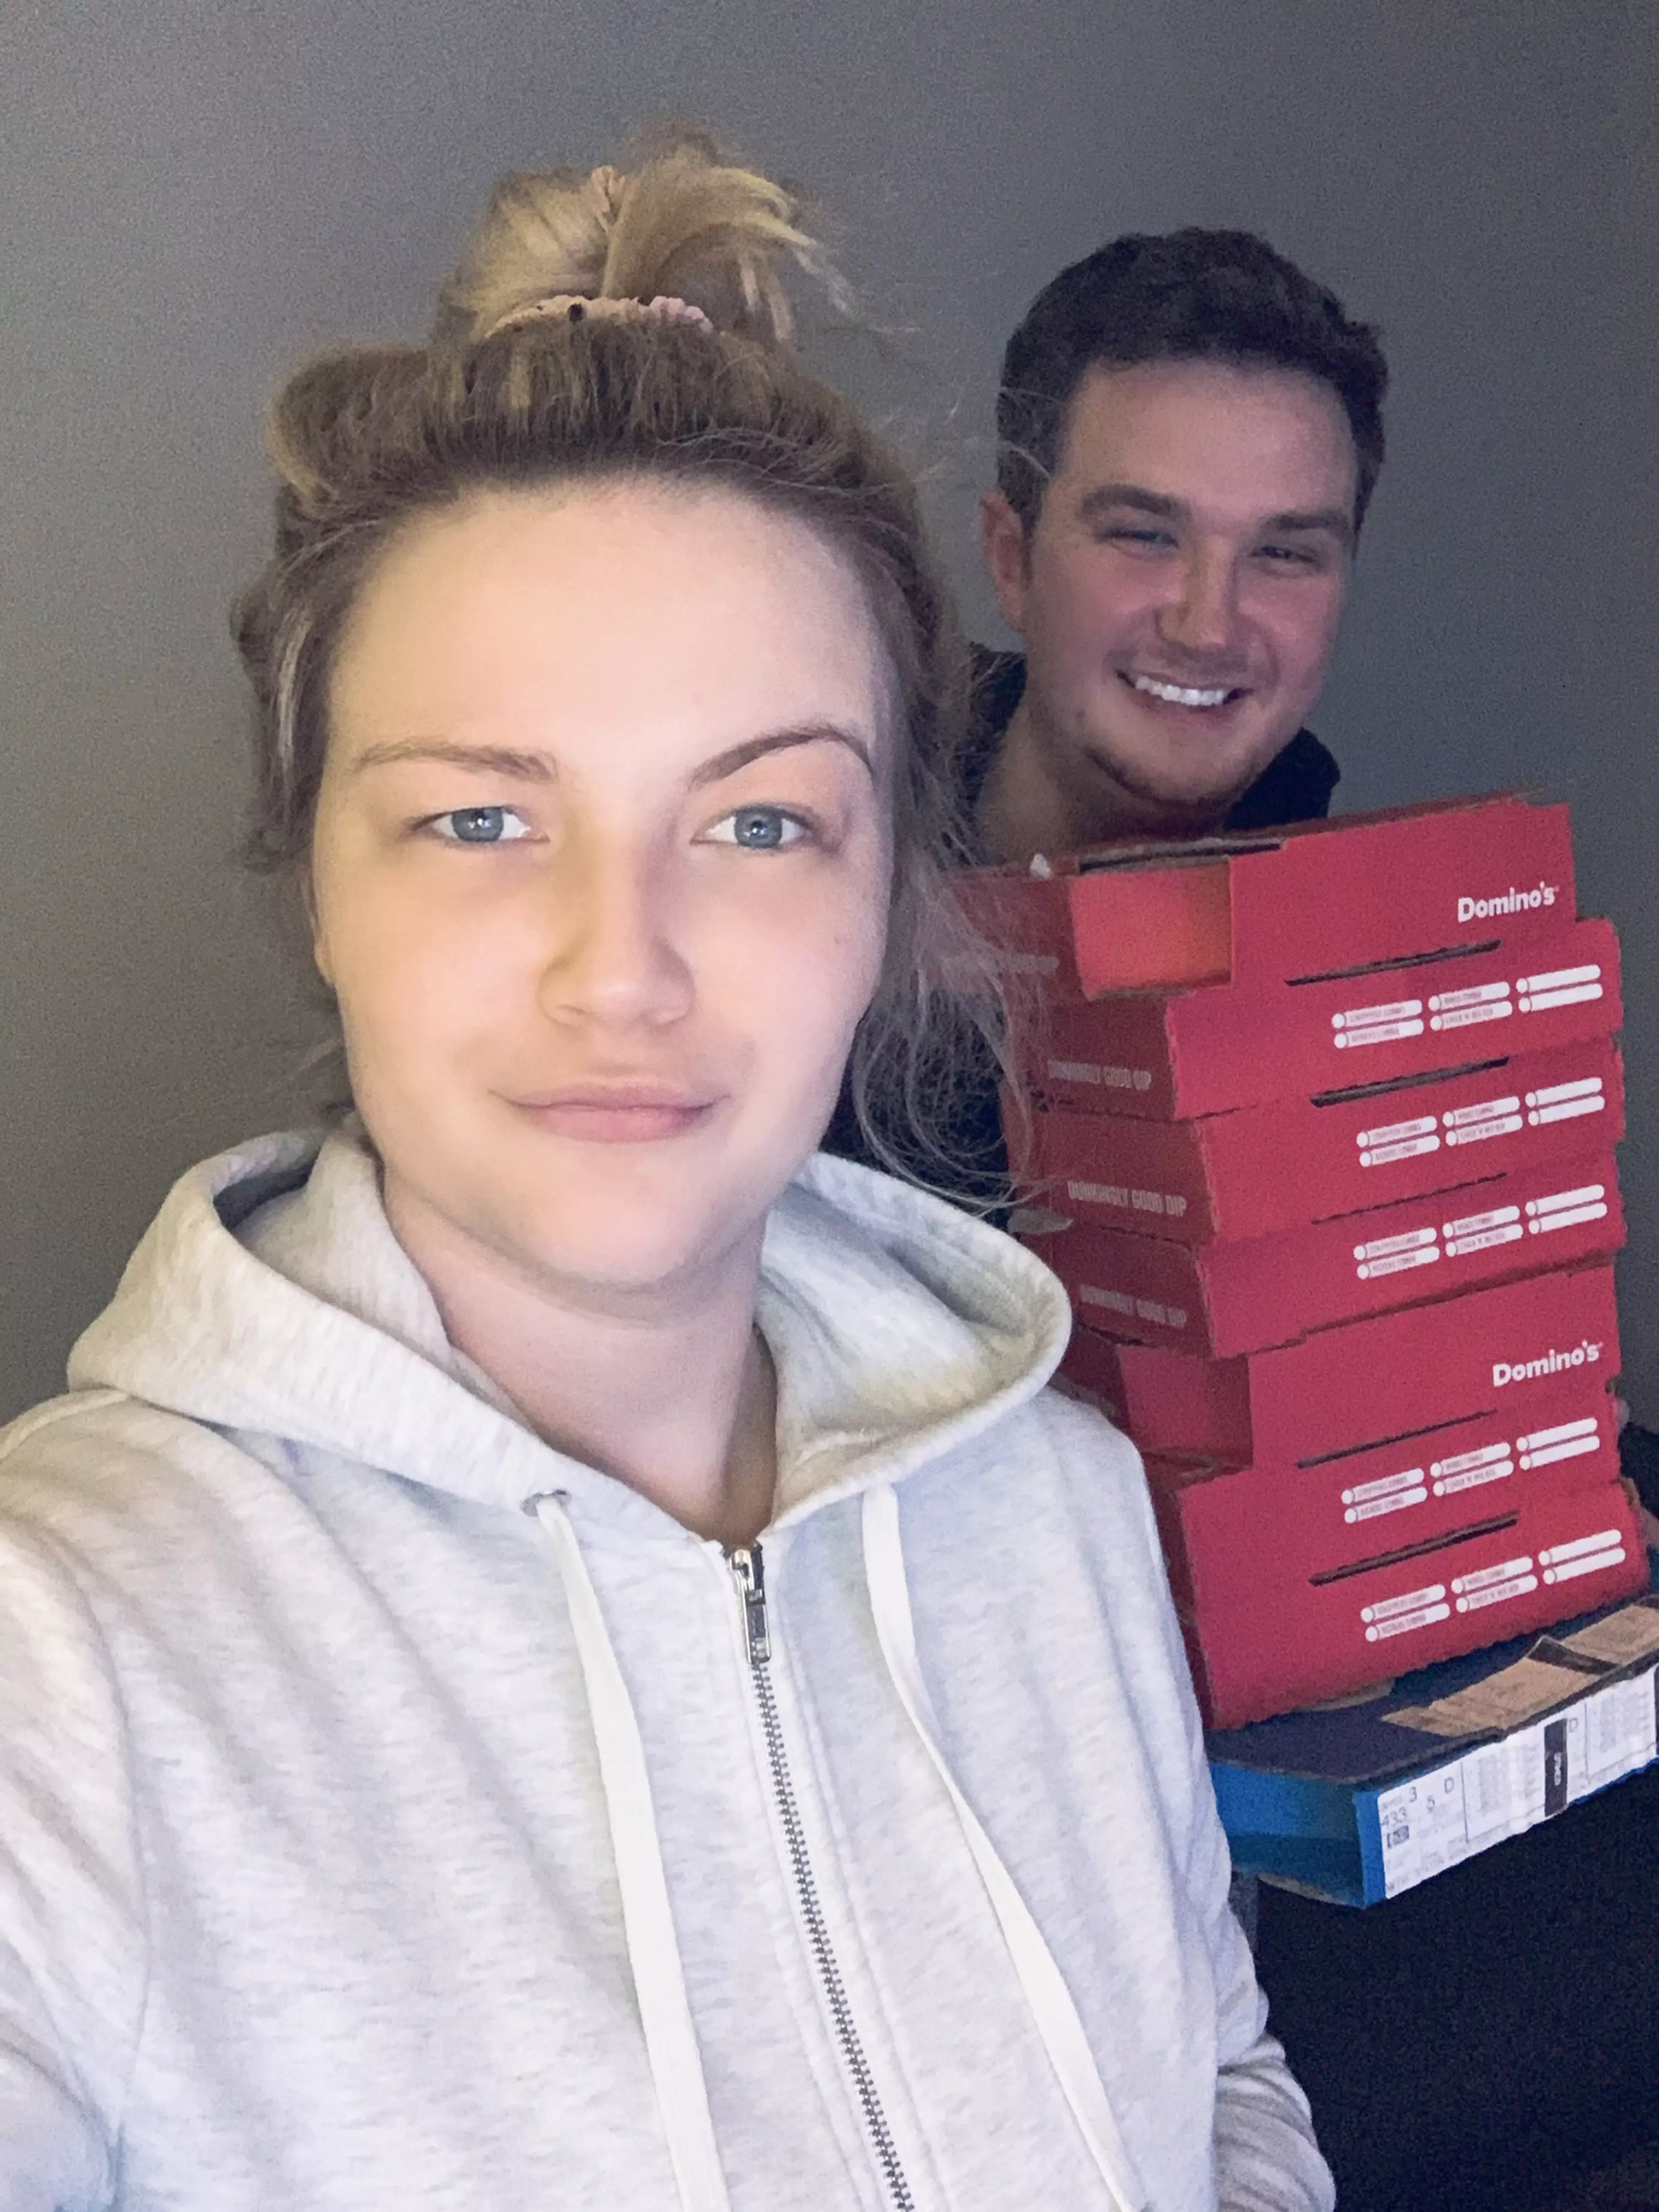 Hannah couldn't believe it when she opened the door to 19 boxes of food (